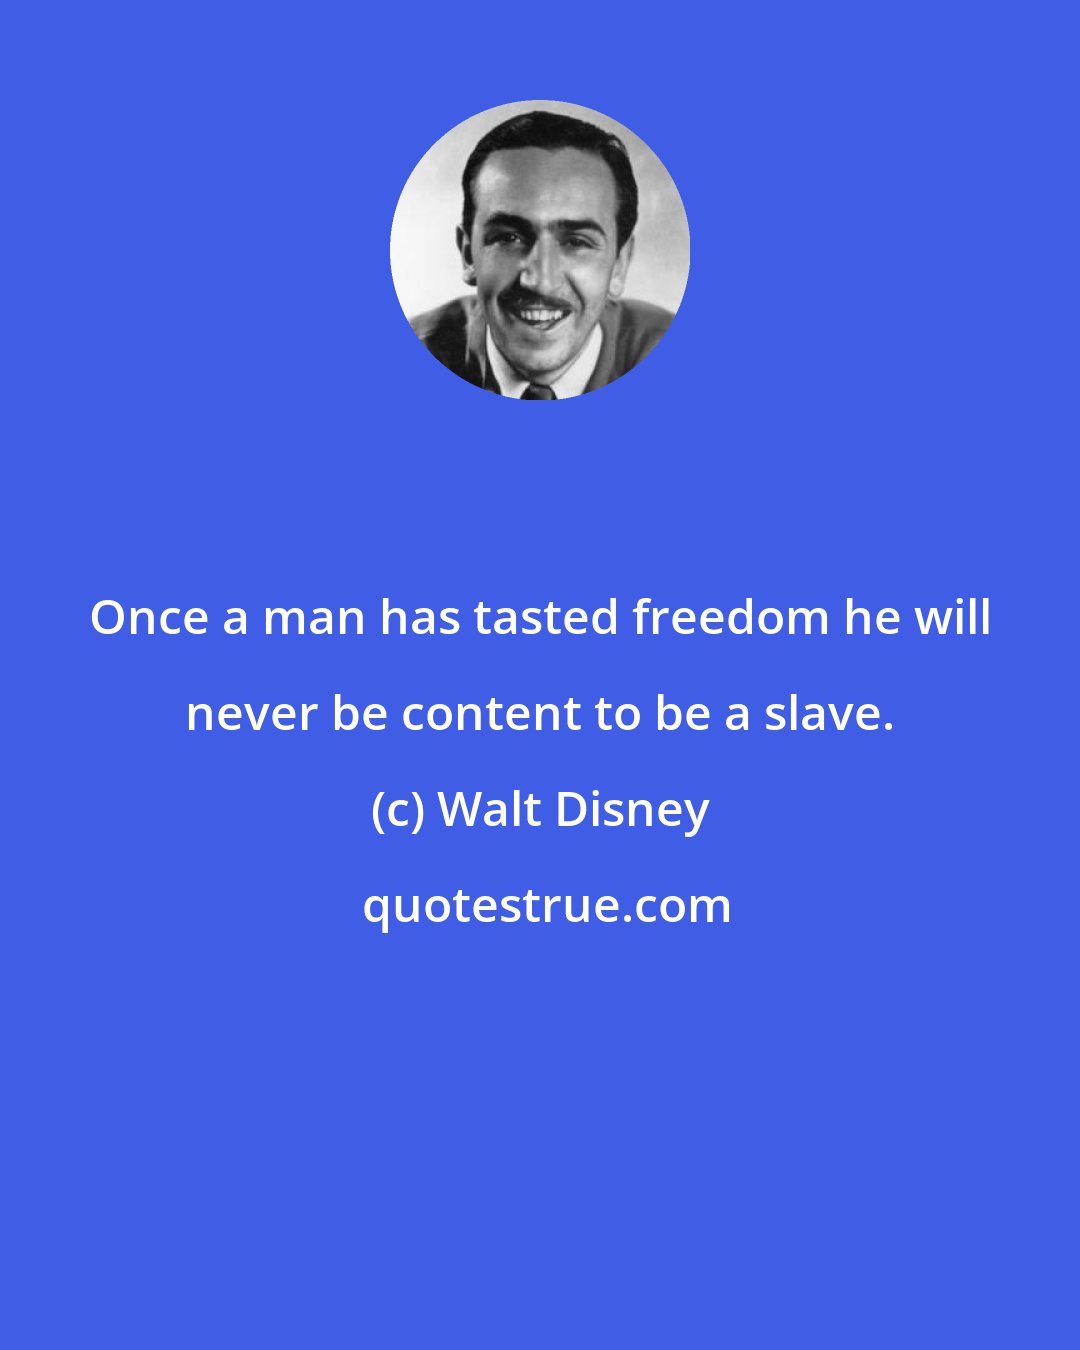 Walt Disney: Once a man has tasted freedom he will never be content to be a slave.